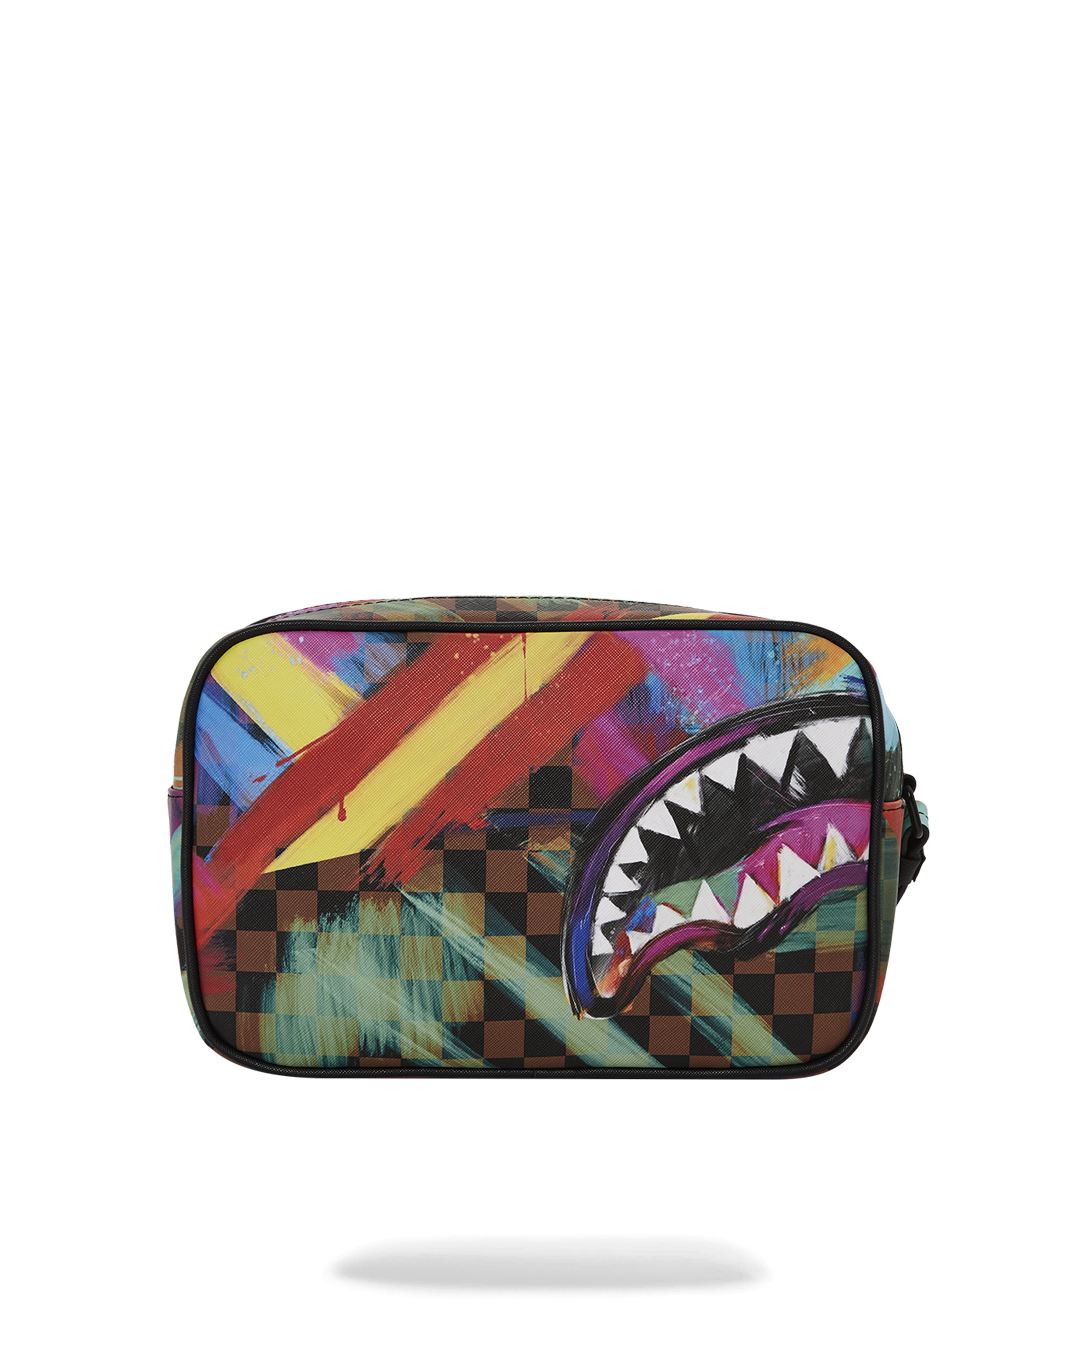 SPRAYGROUND SHARKS IN PARIS PAINTED TOILETRY BAG - The Cross Trainer